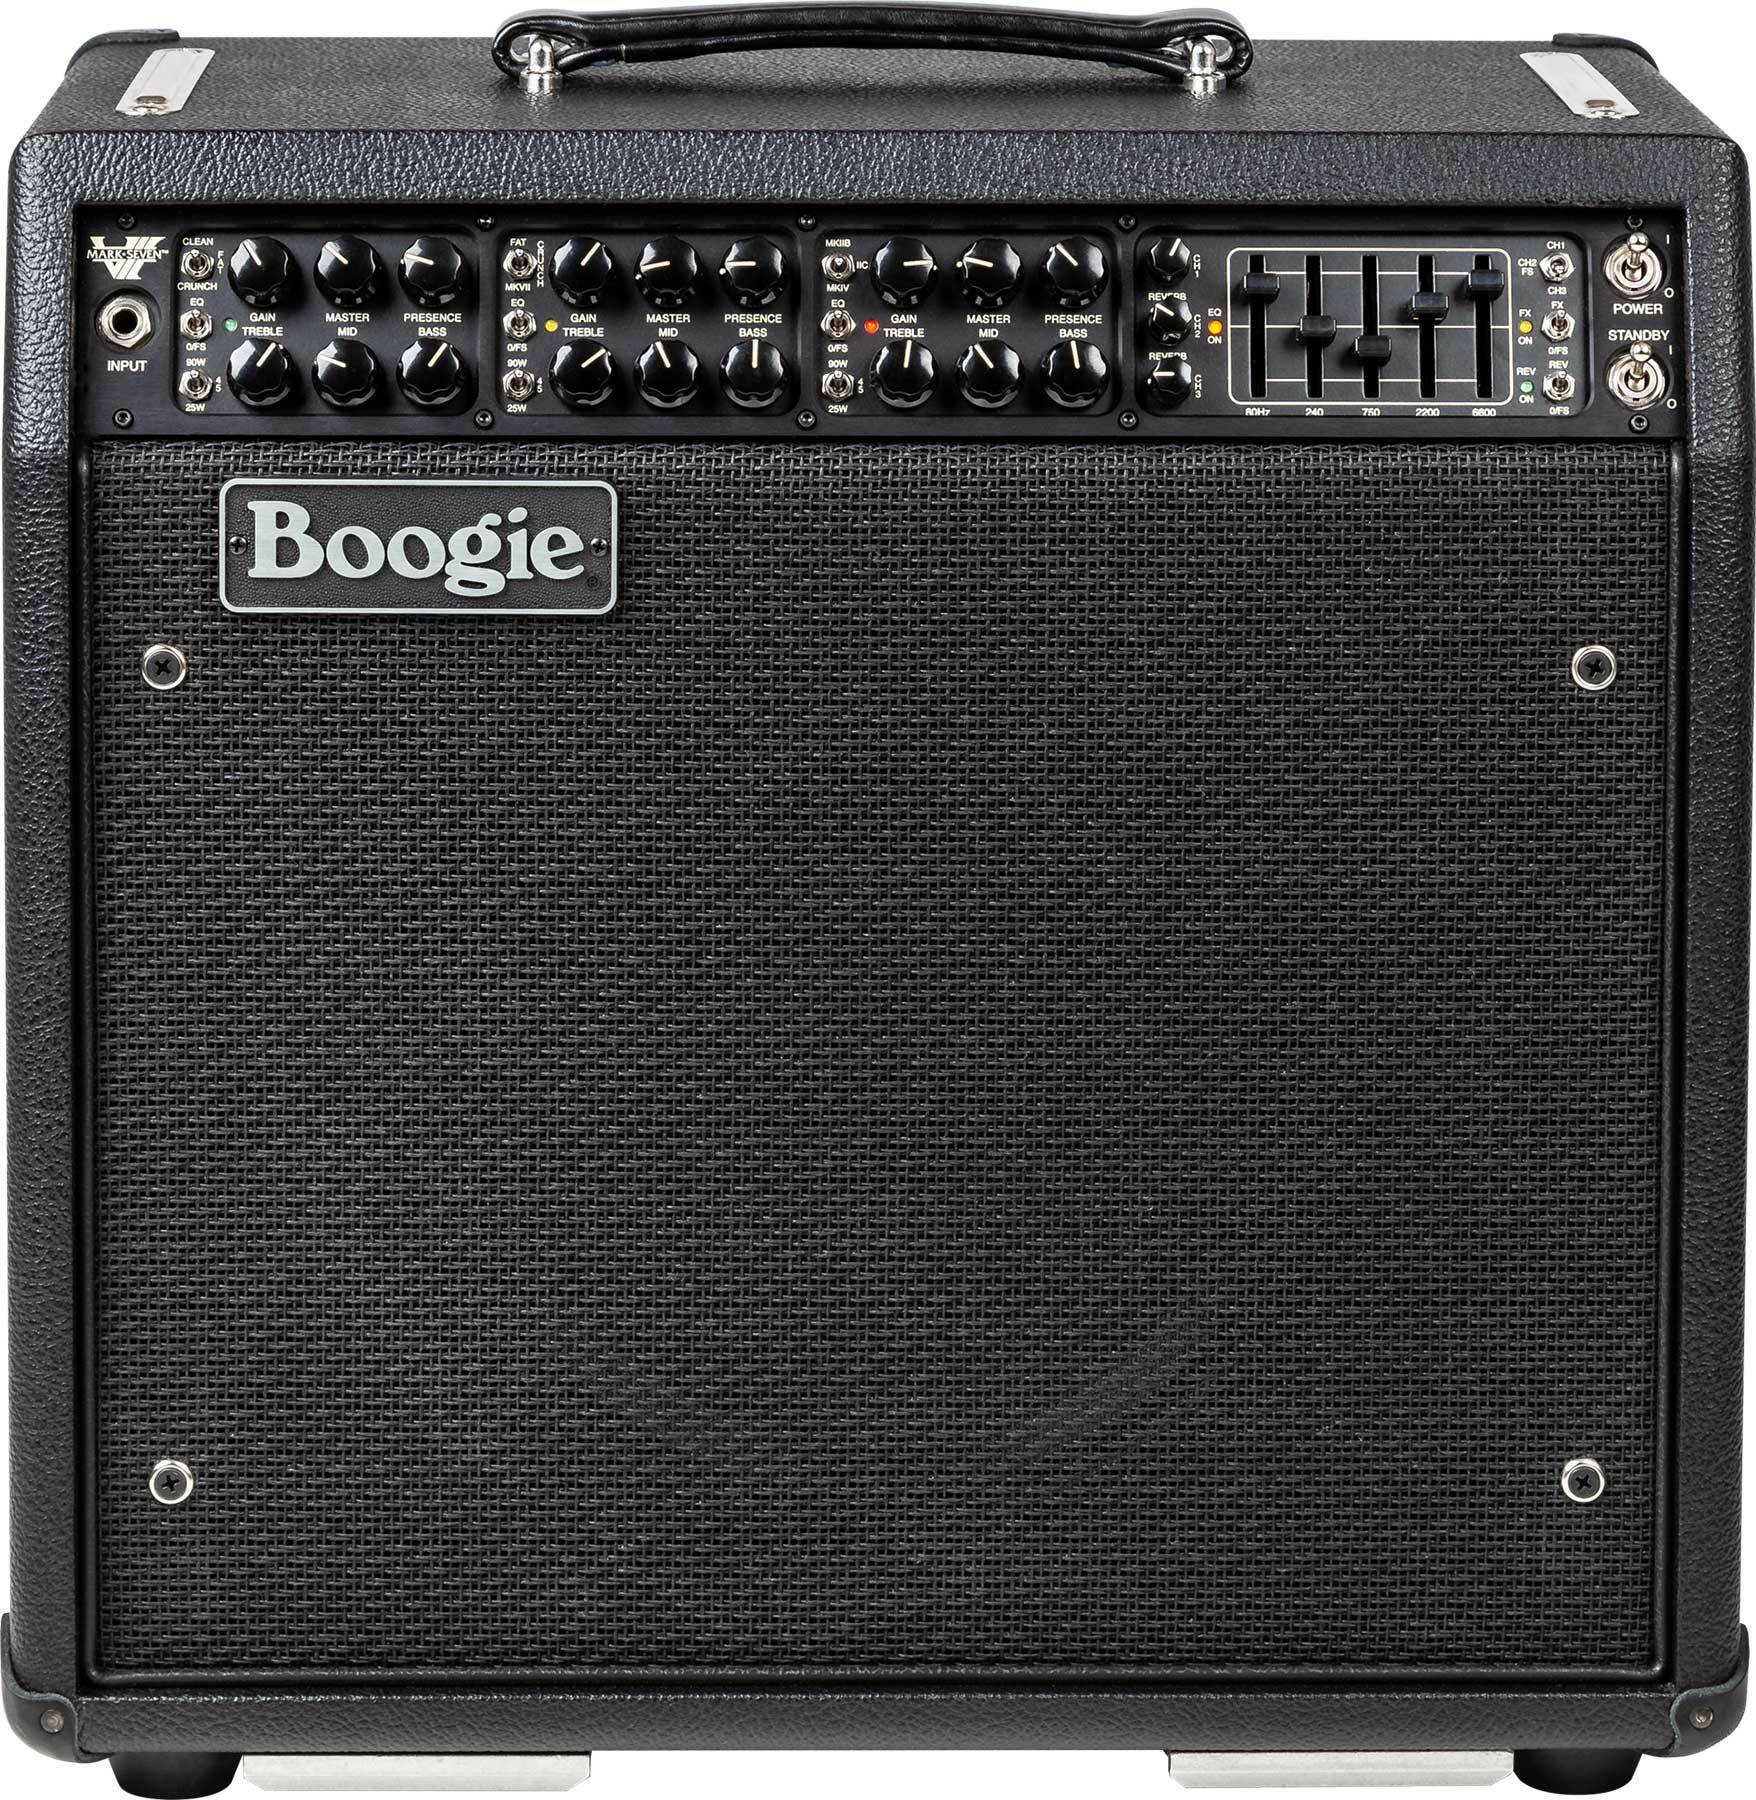 Mesa Boogie Mark Vii 1x12 Combo 25/45/90w 6l6 Black - Electric guitar combo amp - Main picture